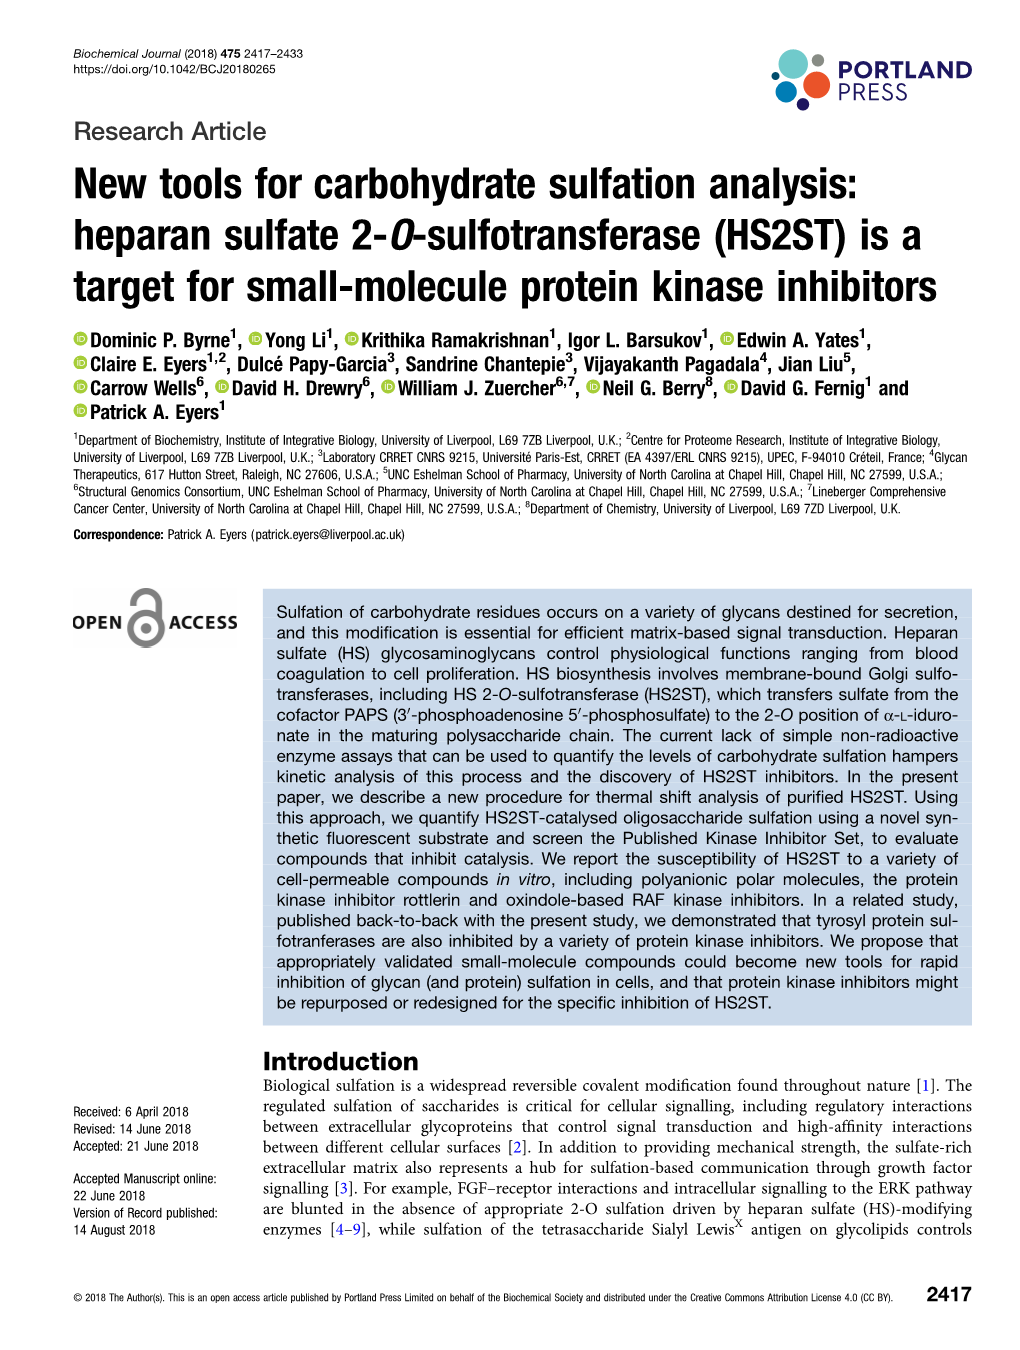 Heparan Sulfate 2-O-Sulfotransferase (HS2ST) Is a Target for Small-Molecule Protein Kinase Inhibitors